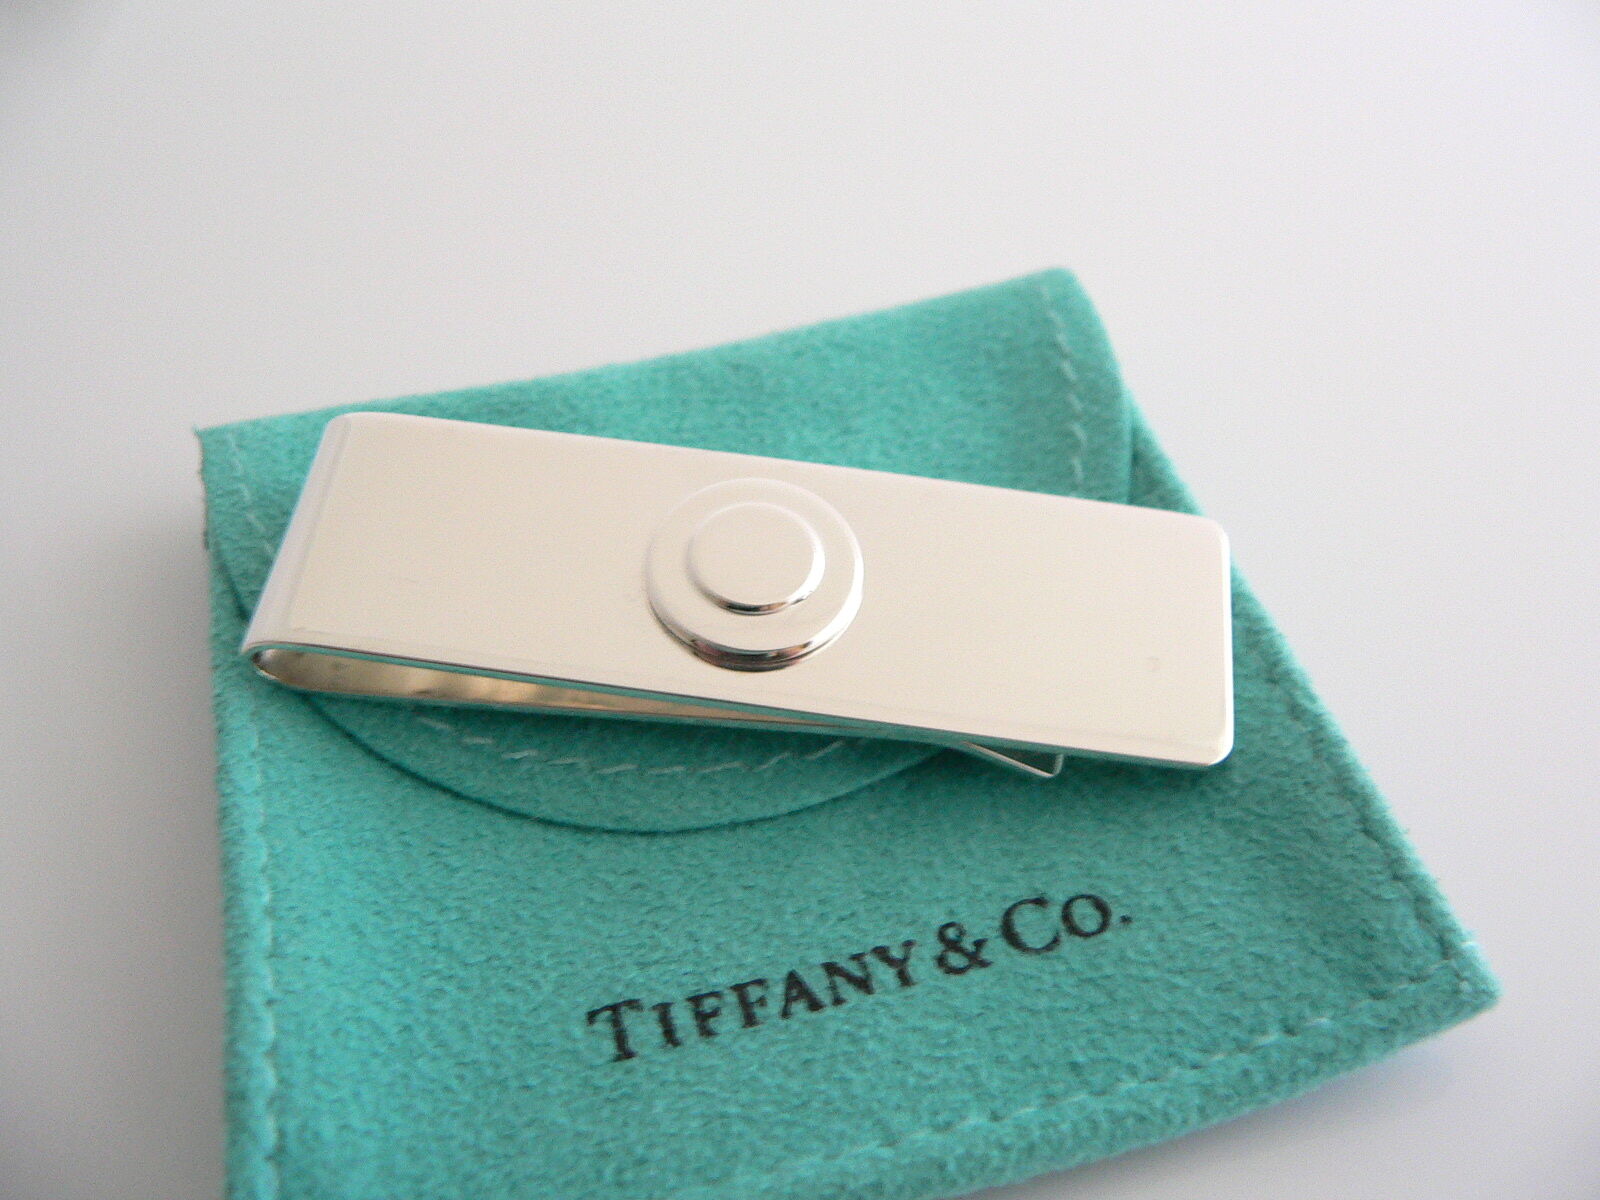 Tiffany & Co Silver Circle Engravable Money Clip Holder Rare Round Gift Pouch